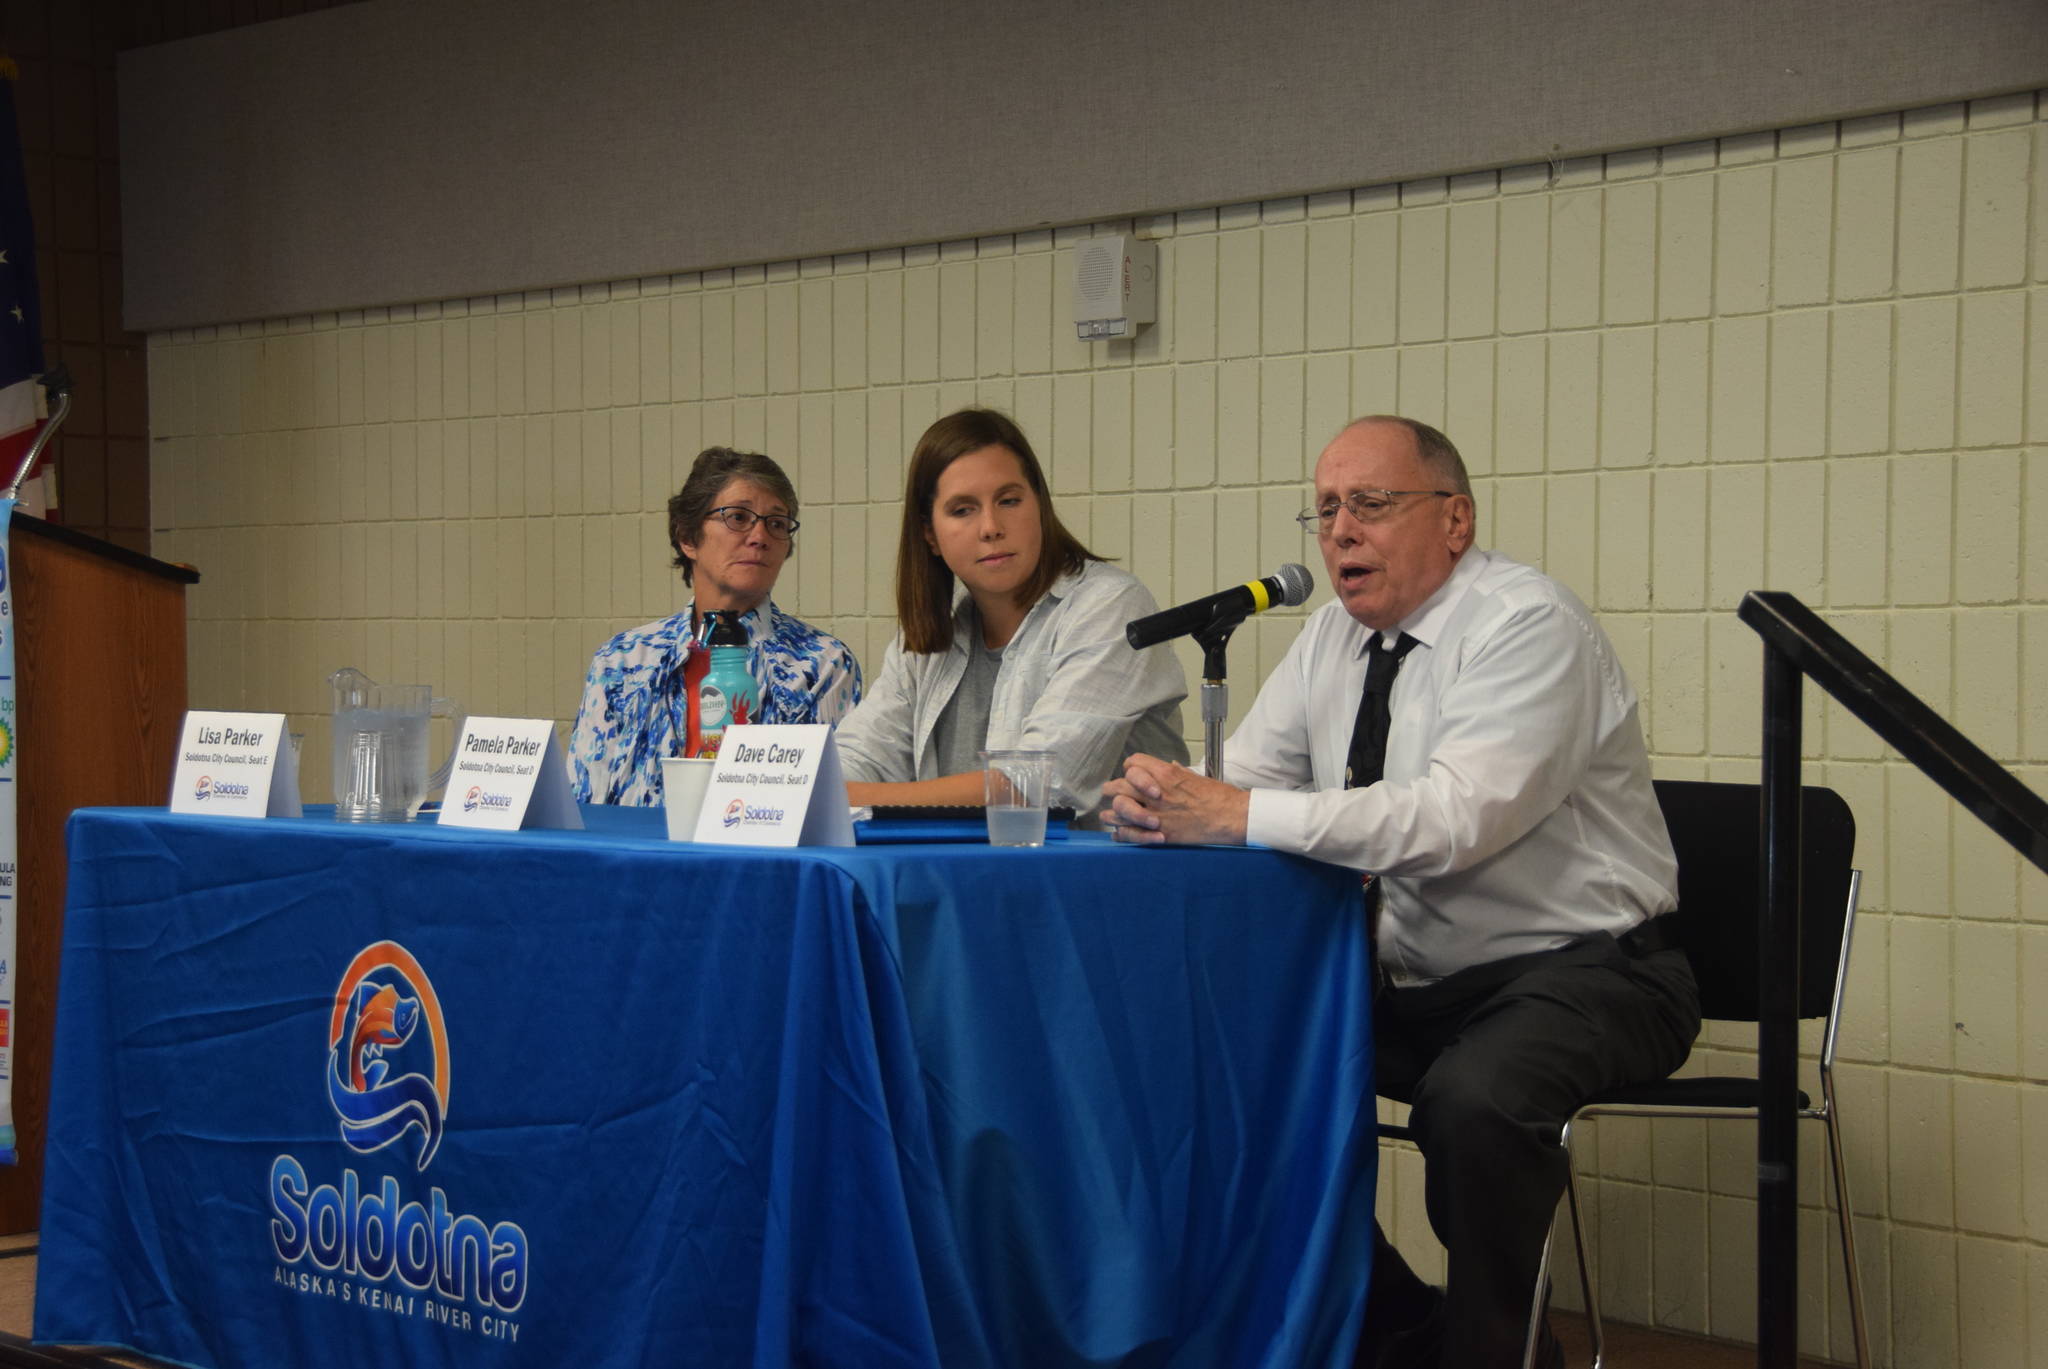 Then-candidates for Soldotna City Council Lisa Parker, Pamela Parker (center) and Dave Carey speak to members of the Soldotna Chamber of Commerce at the Soldotna Sports Complex on Sept. 11, 2019. Parker resigned her seat effective May 27. (Photo by Brian Mazurek/Peninsula Clarion)